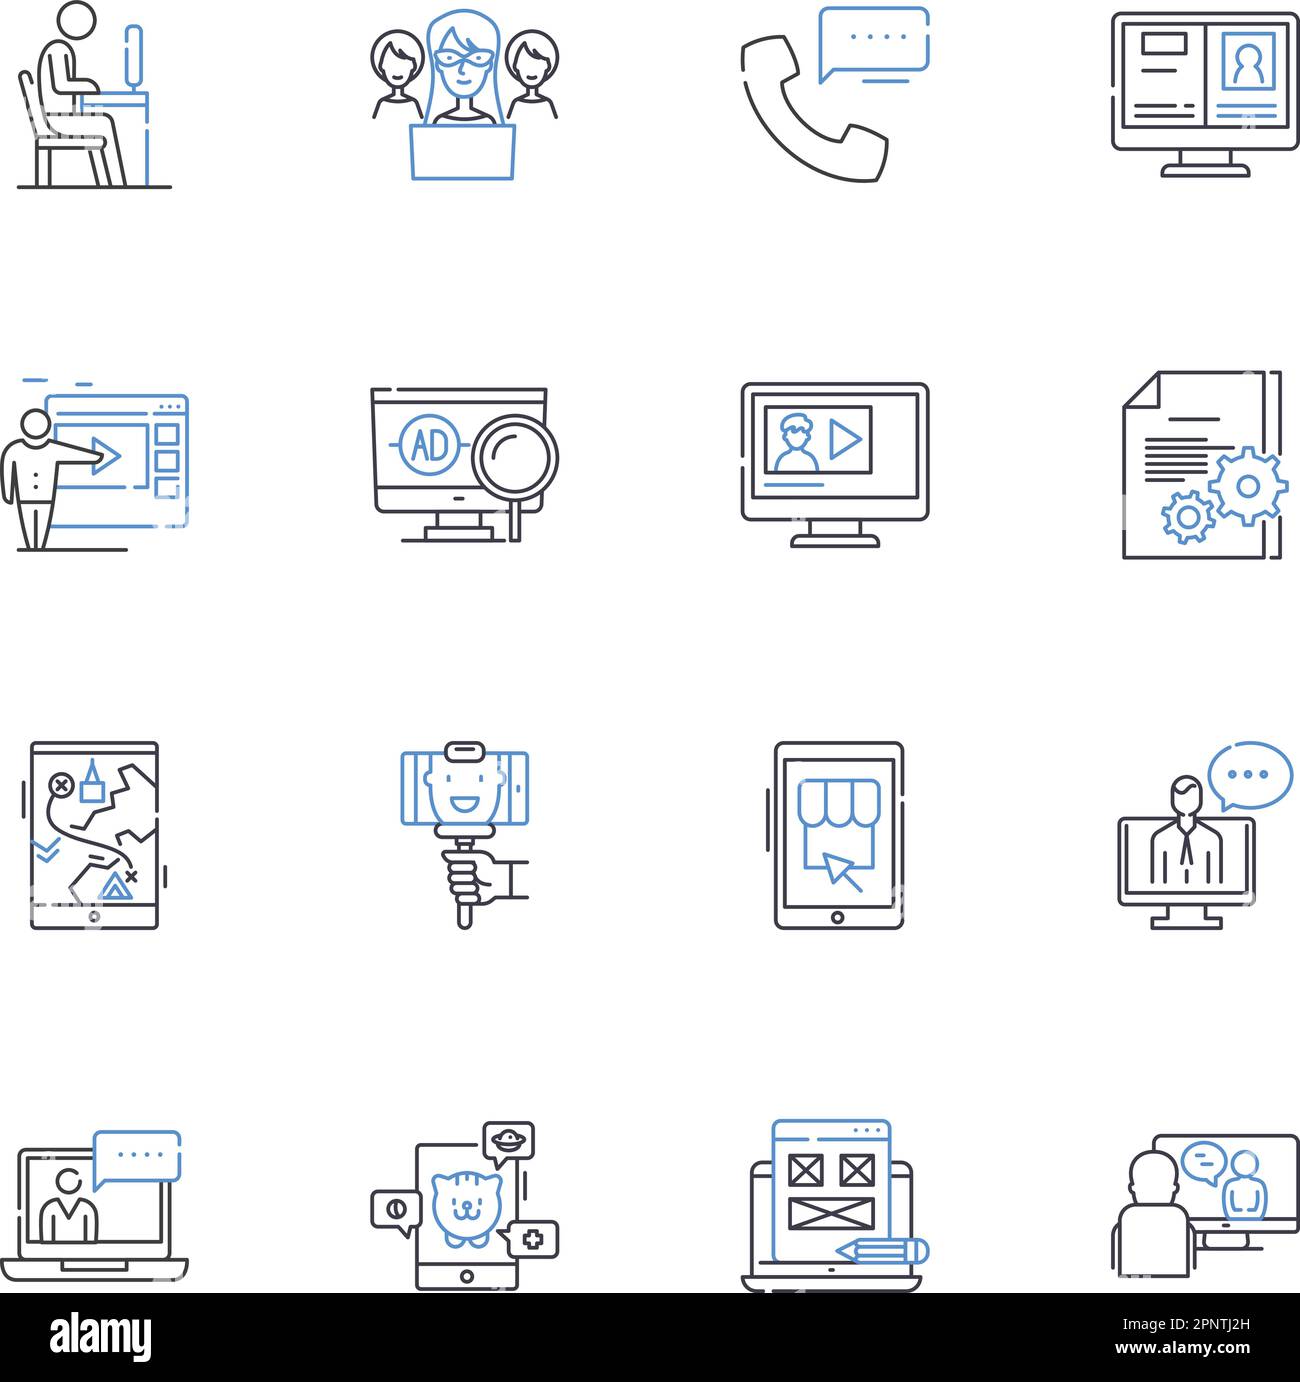 Blogosphere line icons collection. Community, Content, Conversation, Engagement, Influence, Opinion, Readership vector and linear illustration Stock Vector